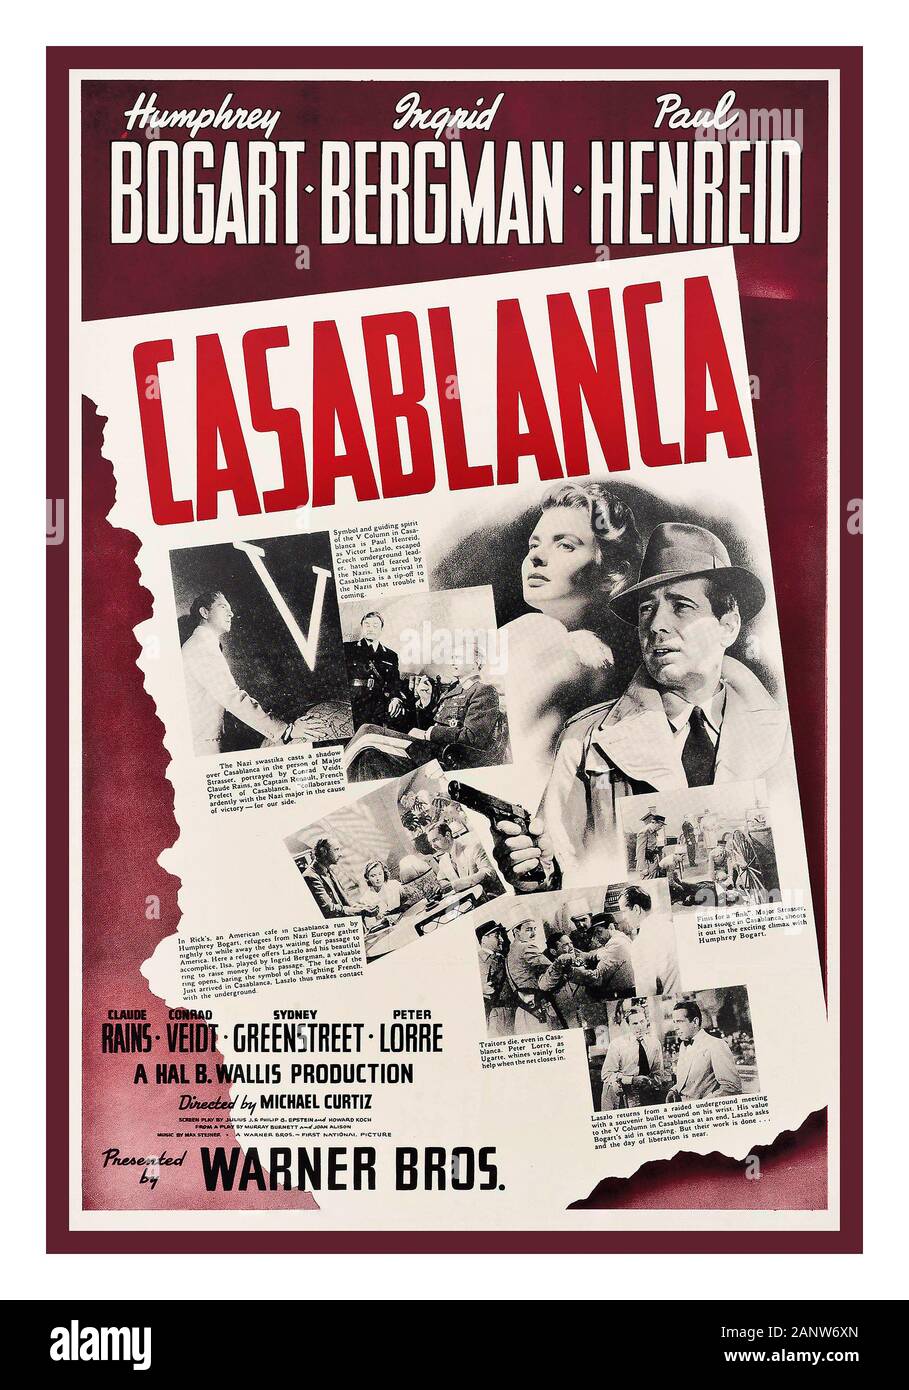 ‘CASABLANCA’ 1940's Vintage Film Movie Poster Casablanca a 1942 American romantic drama film directed by Michael Curtiz. The film stars Humphrey Bogart, Ingrid Bergman, and Paul Henreid; it also features Claude Rains, Conrad Veidt, Sydney Greenstreet, Peter Lorre, and Dooley Wilson. Set during  World War II, it focuses on an American expatriate who must choose between his love for a woman and helping her and her husband, a Czech Resistance leader, escape from the Vichy-controlled city of Casablanca to continue his fight against the Nazis 1942, Warner Bros., U.S. Stock Photo